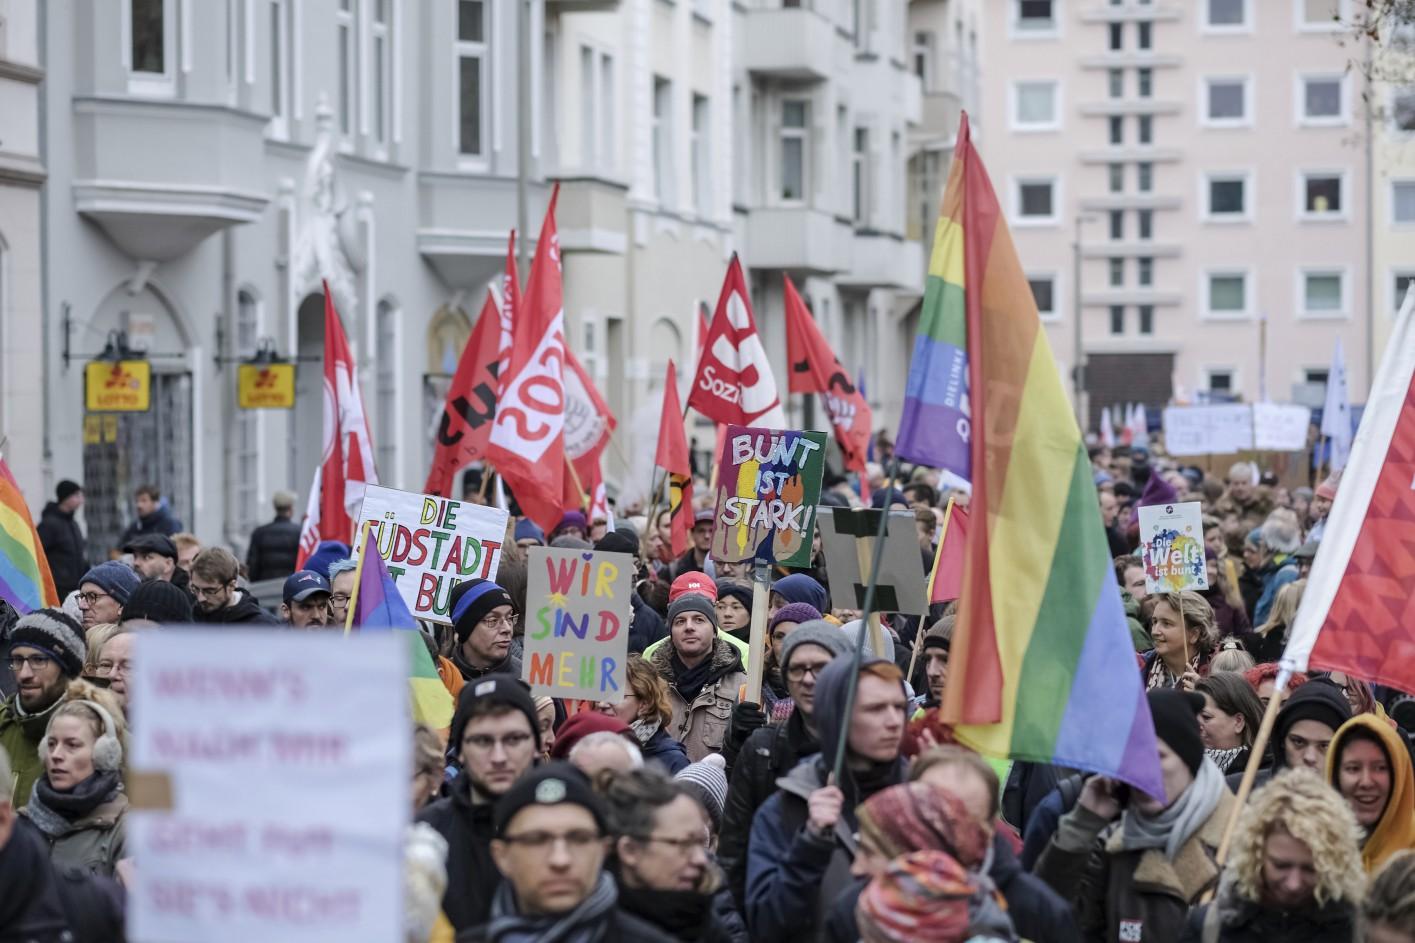 People take part in a counter-protest against the German far-right party NPD in Hanover